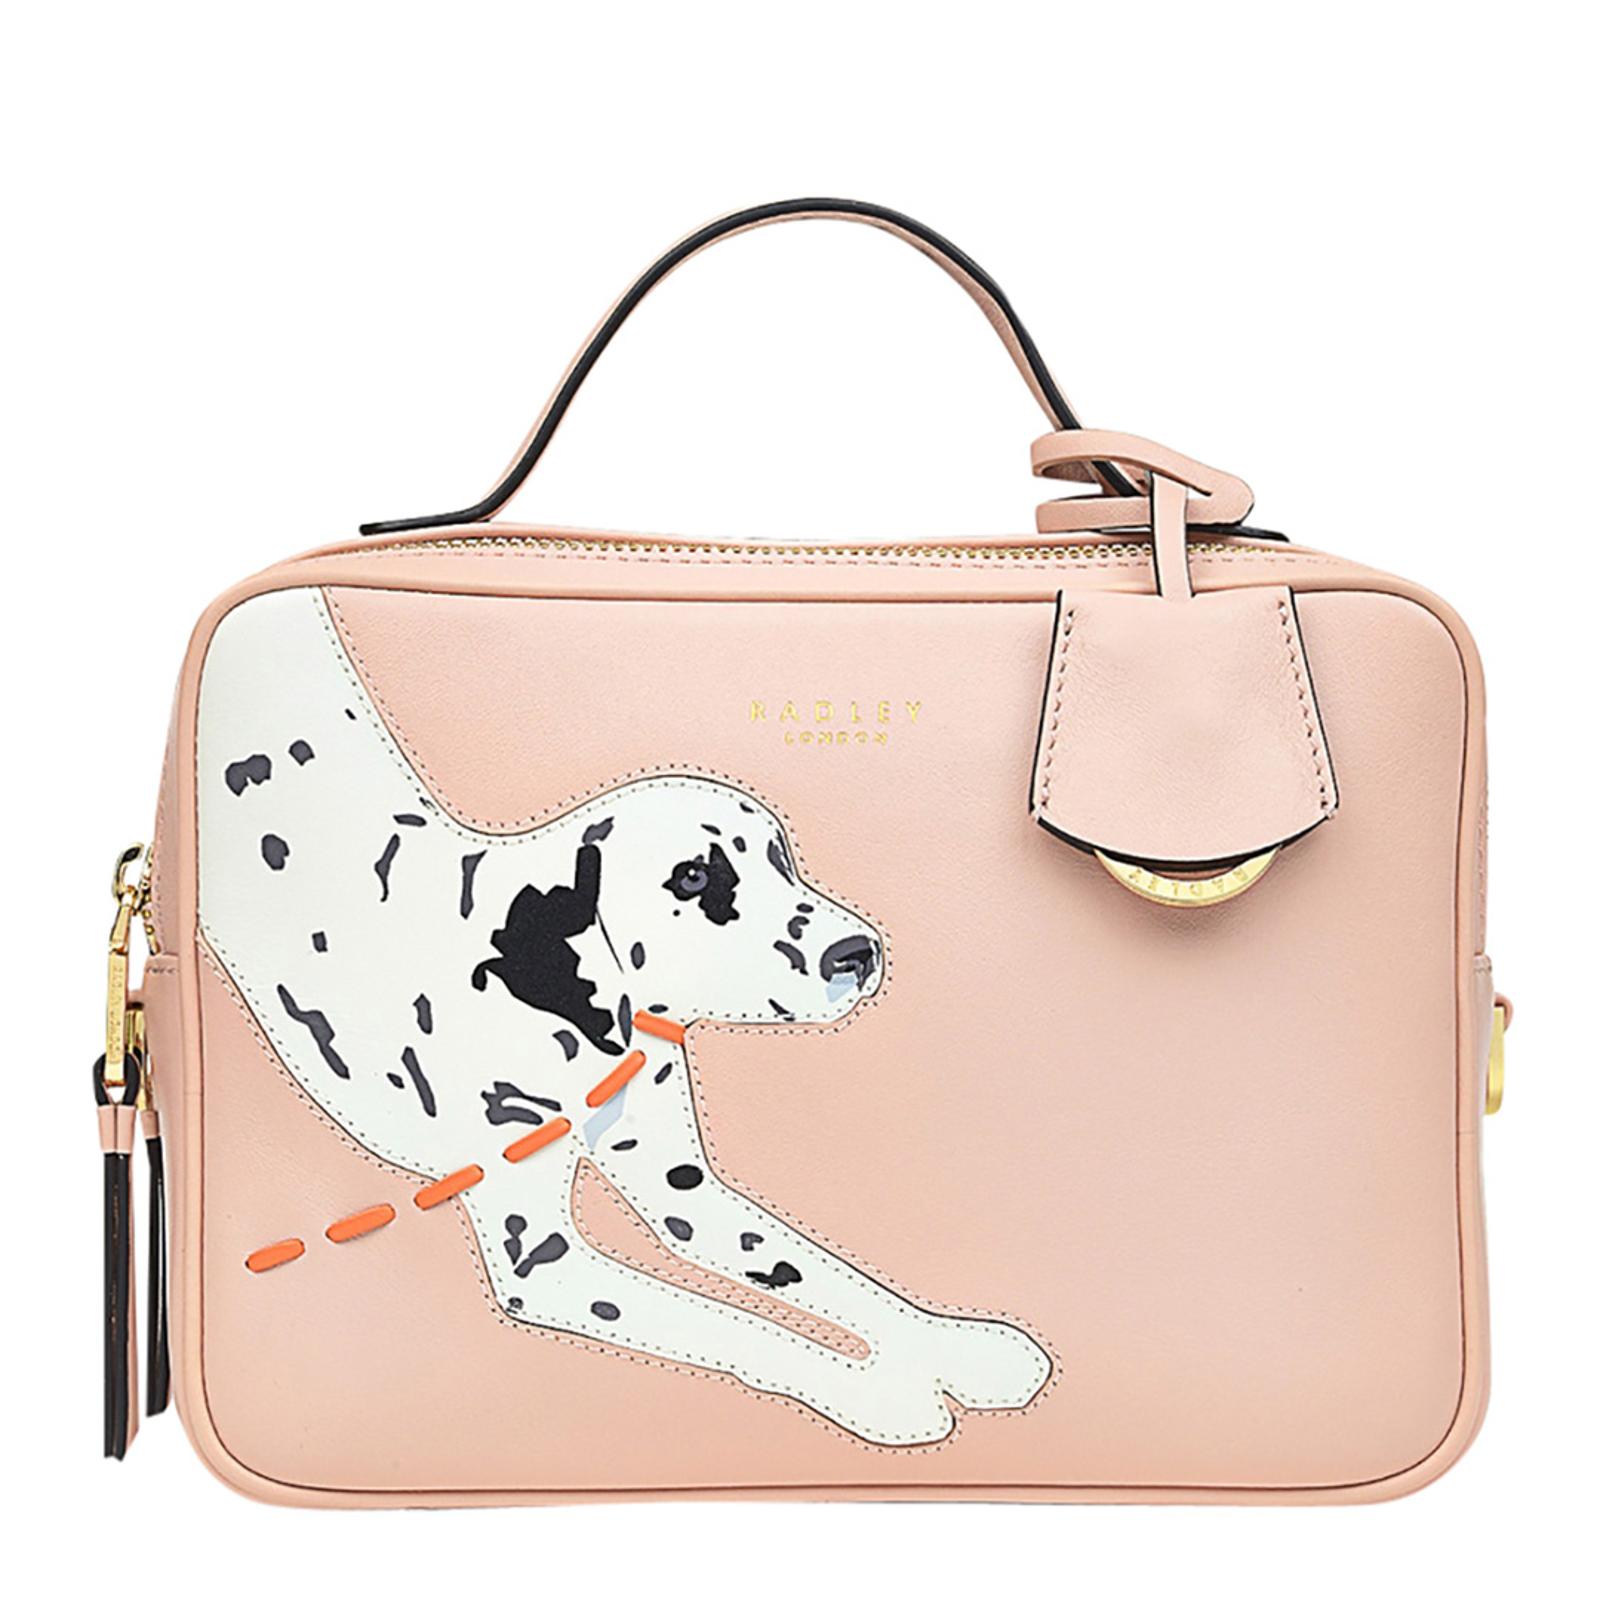 Pink Radley And Friends Leather Small Multiway Bag - BrandAlley